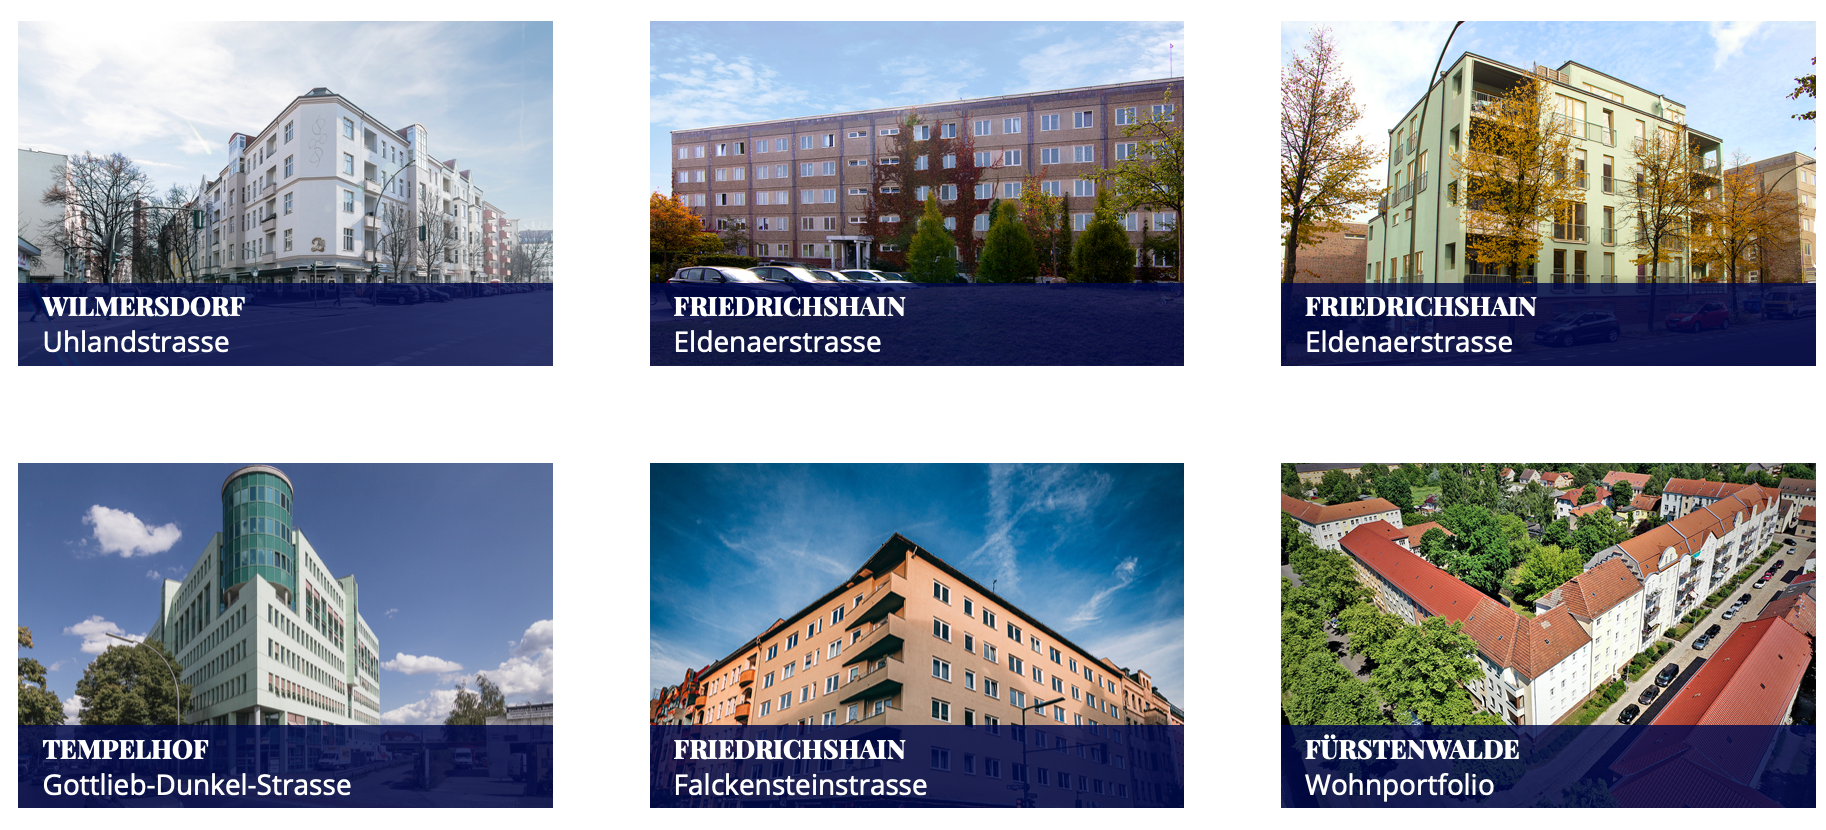 A selection of German properties